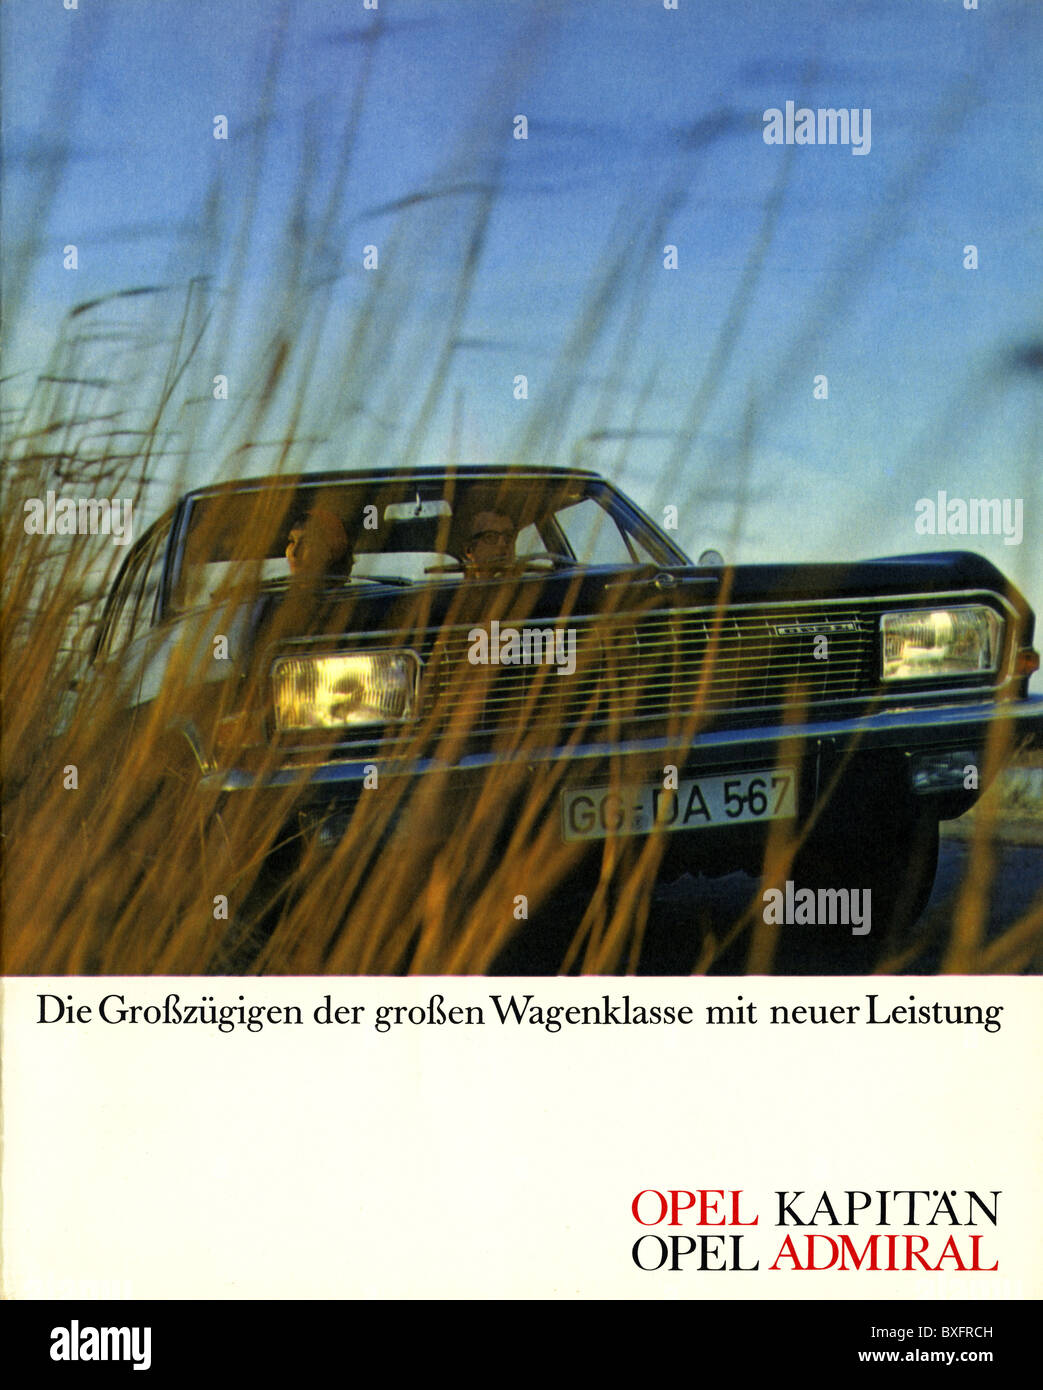 transport / transportation, car, vehicle variants, Opel, Opel Kapitän, Opel Admiral, advertising prospect, Germany, 1965, Additional-Rights-Clearences-Not Available Stock Photo